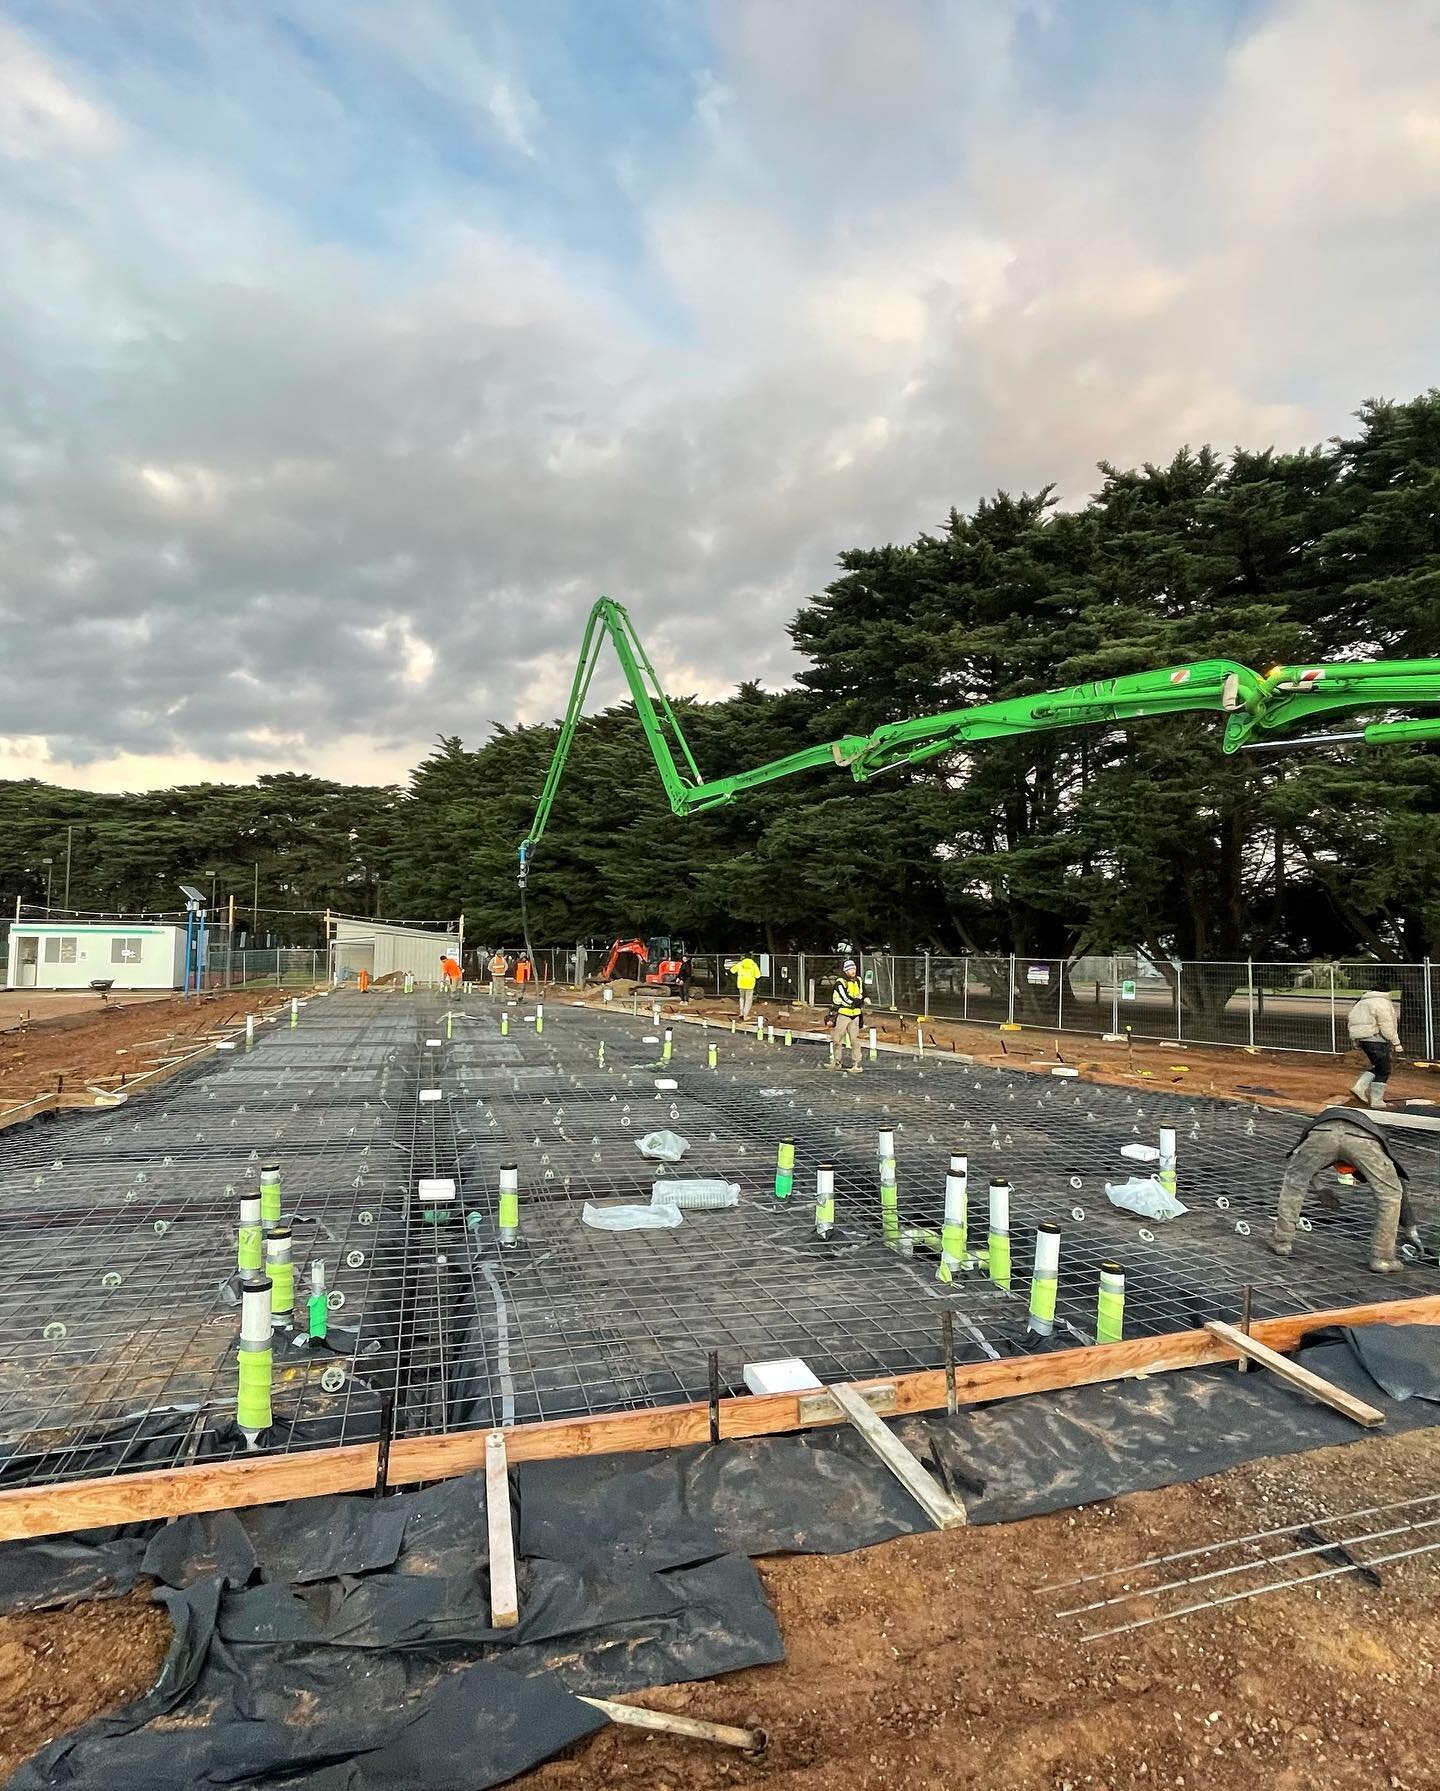 Late finish for our recent job in Lara, 454m2 pavilion for Lara netball and tennis club #concrete #burnishedconcrete